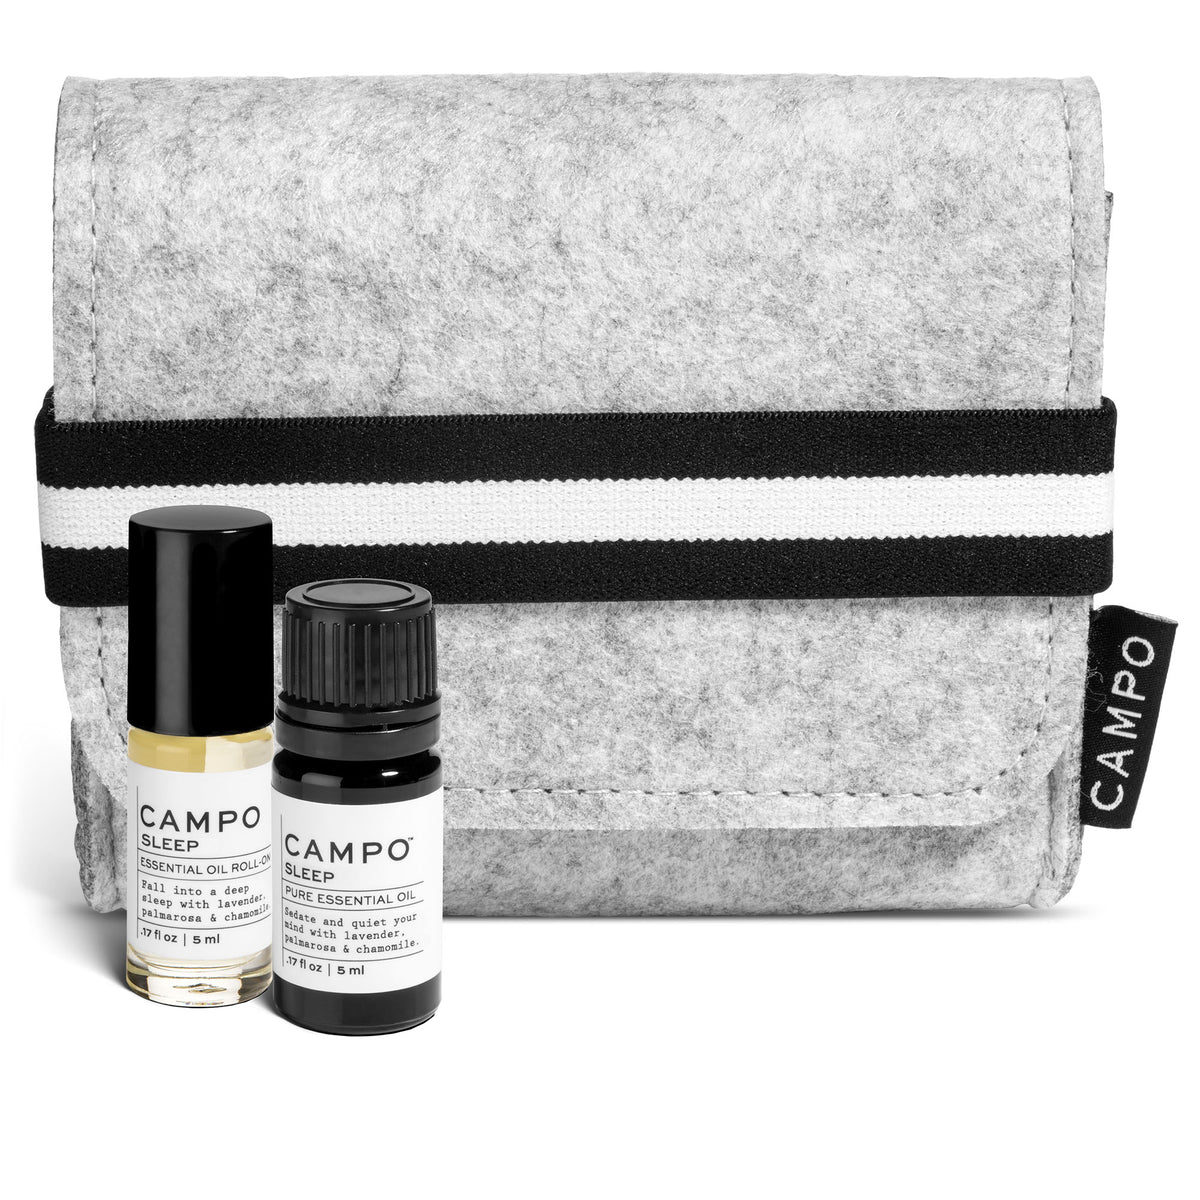 Calm &amp; quiet your mind with SLEEP Essential Oil Roll-On &amp; SLEEP Pure Essential Oil.